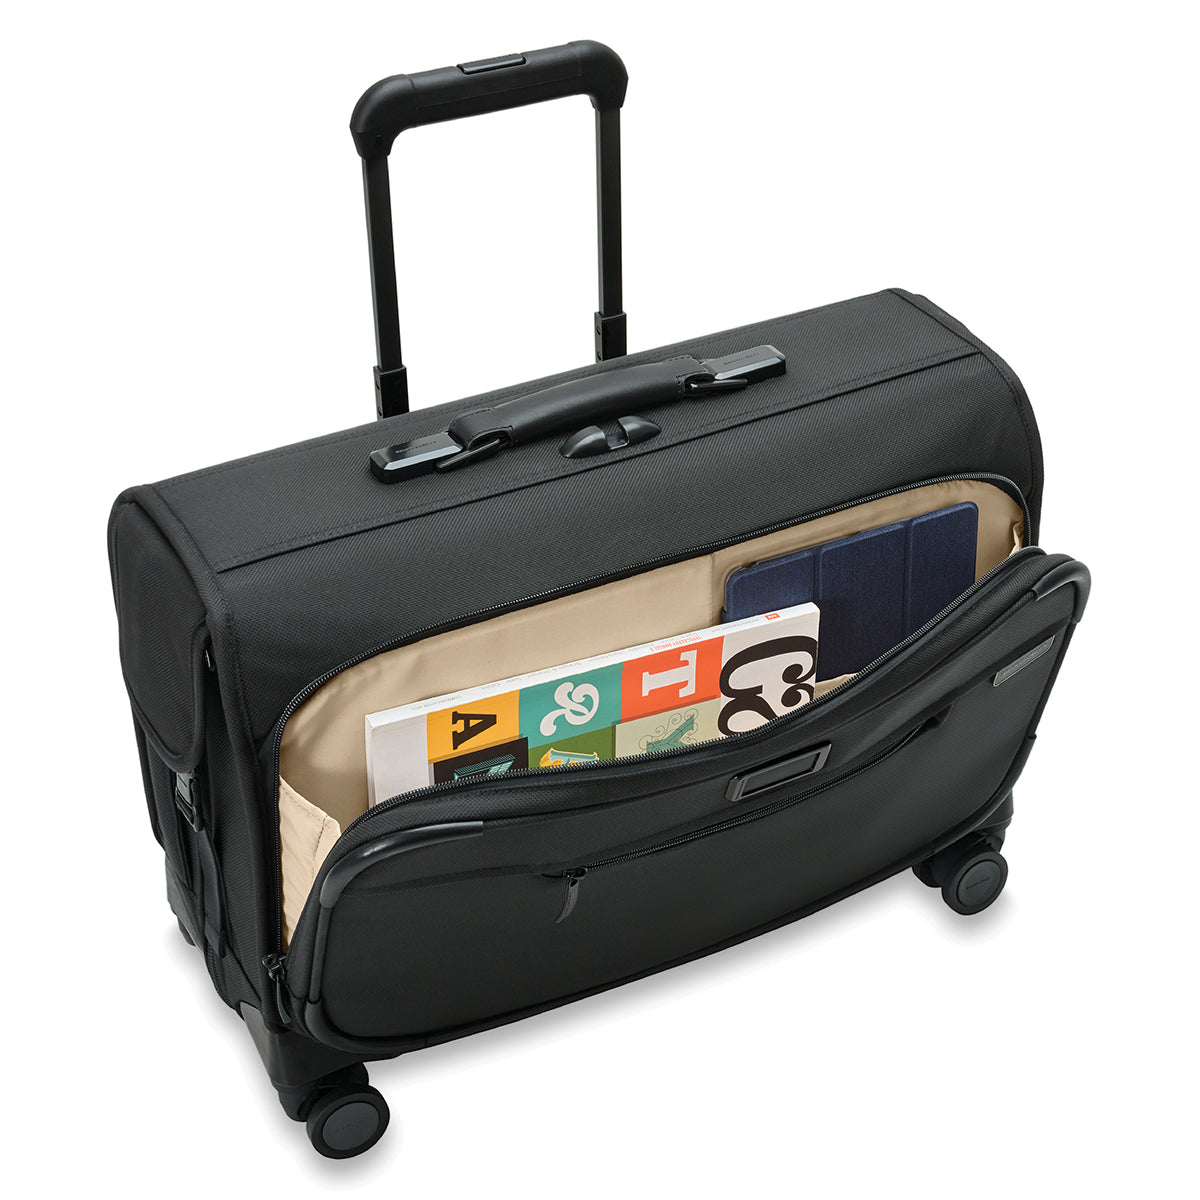 Briggs & Riley Baseline Wide Carry-On Garment Spinner